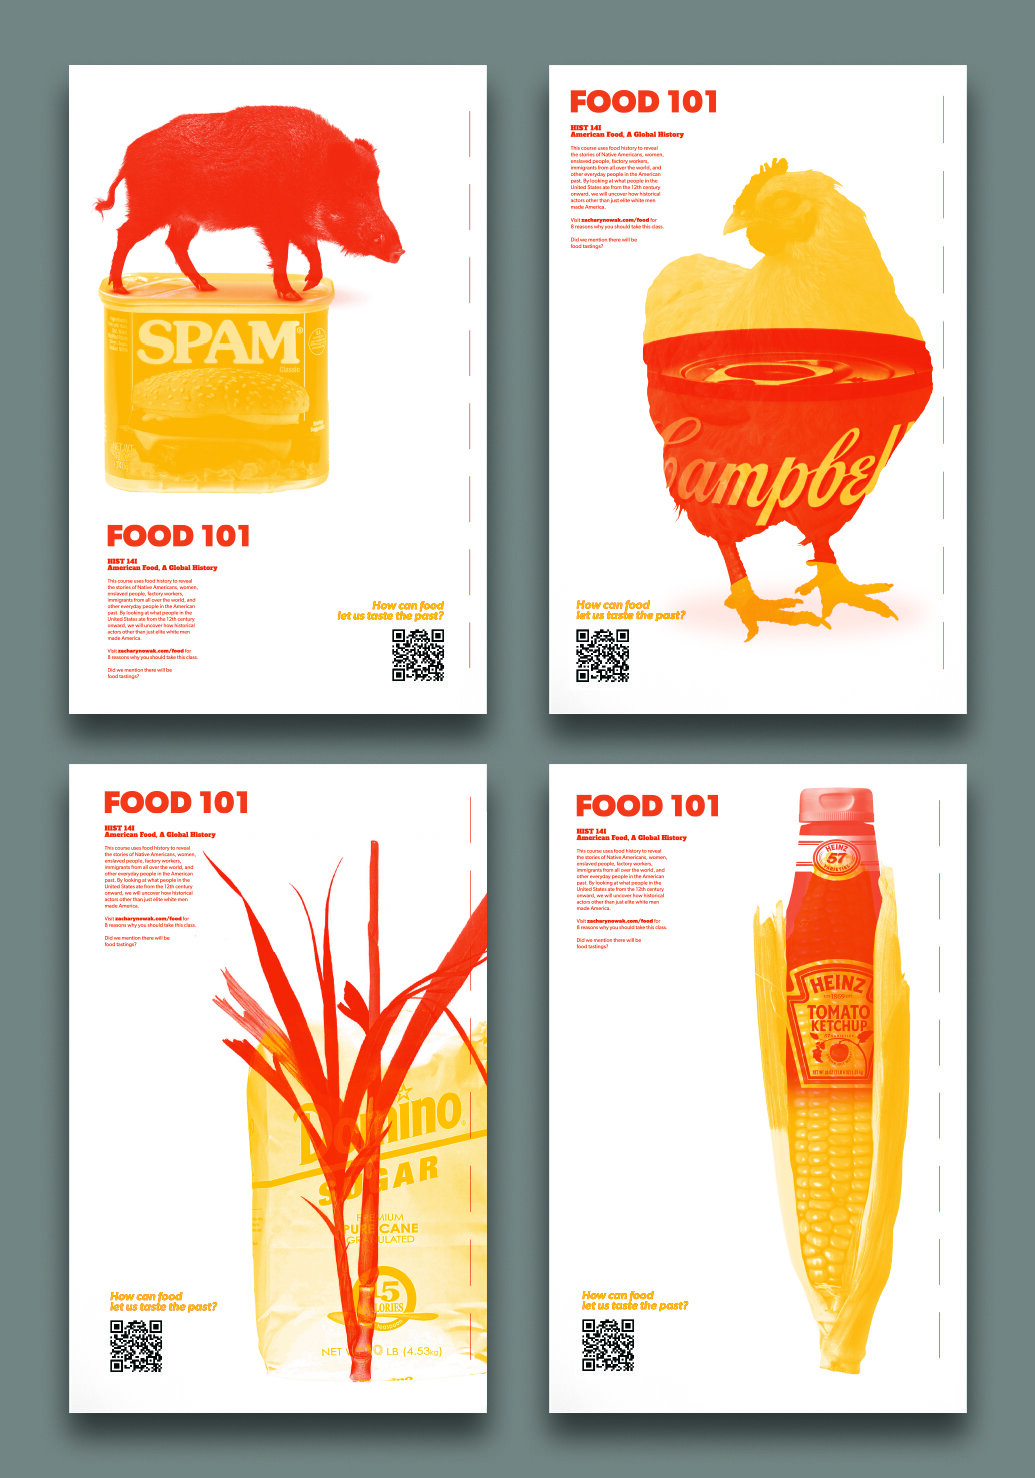  Poster series for Harvard History Department’s Food 101 course. 